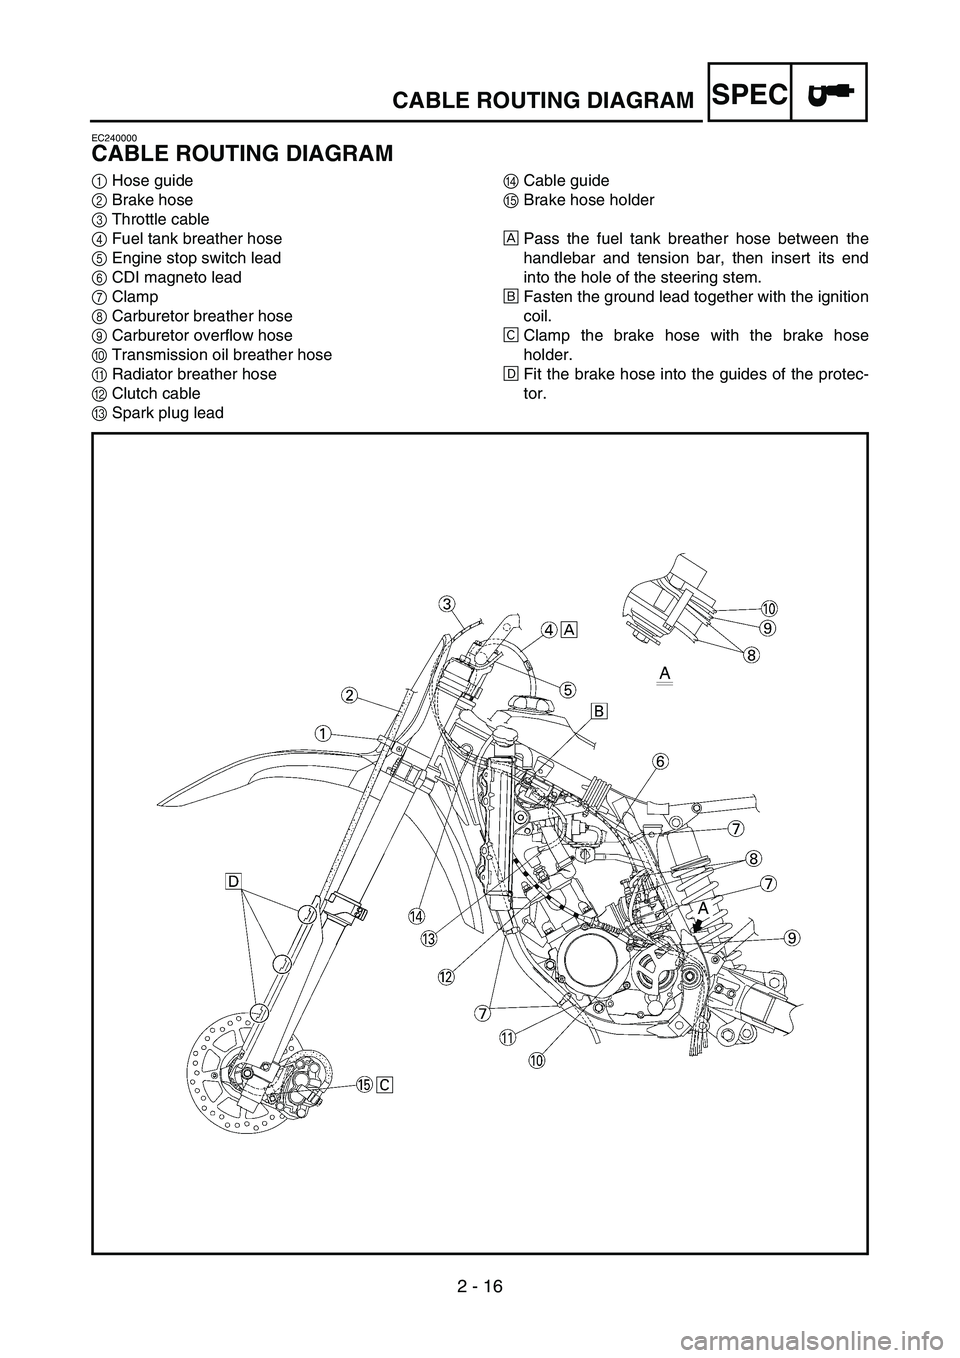 YAMAHA YZ85 2003  Betriebsanleitungen (in German) 2 - 16
SPEC
EC240000
CABLE ROUTING DIAGRAM
1Hose guide
2Brake hose
3Throttle cable
4Fuel tank breather hose
5Engine stop switch lead
6CDI magneto lead
7Clamp
8Carburetor breather hose
9Carburetor over